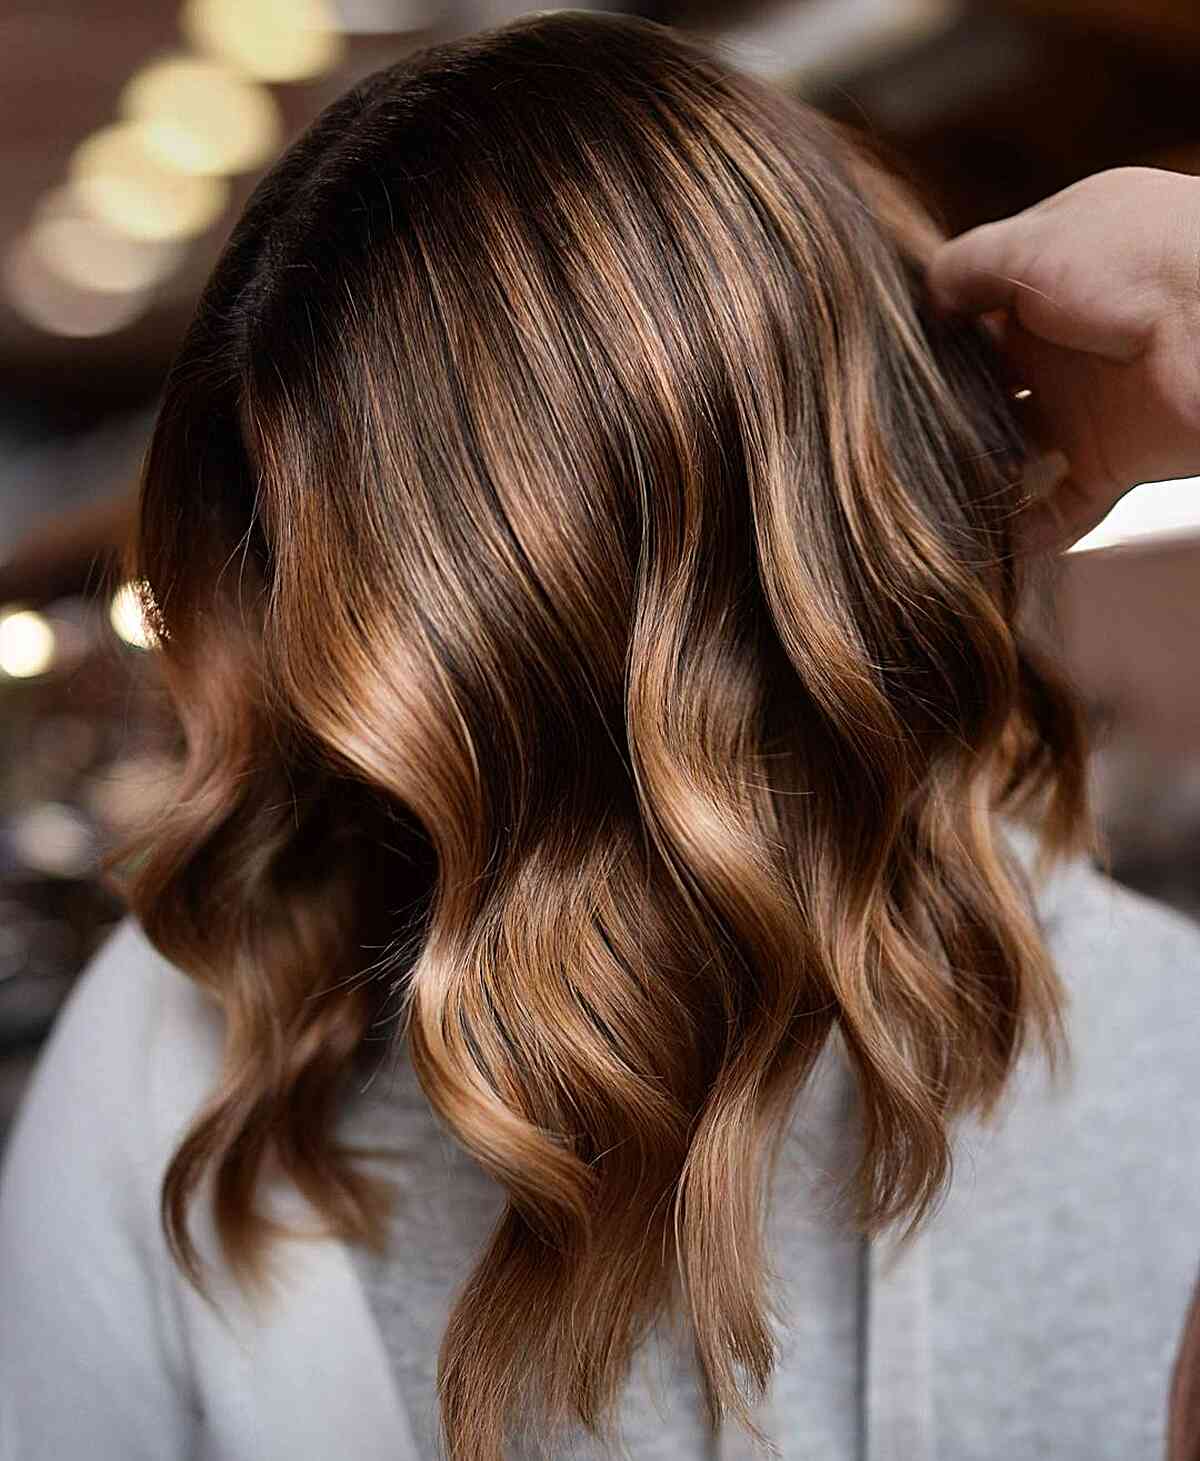 44 Brown Hair With Blonde Highlights Ideas to Show to Your Colorist